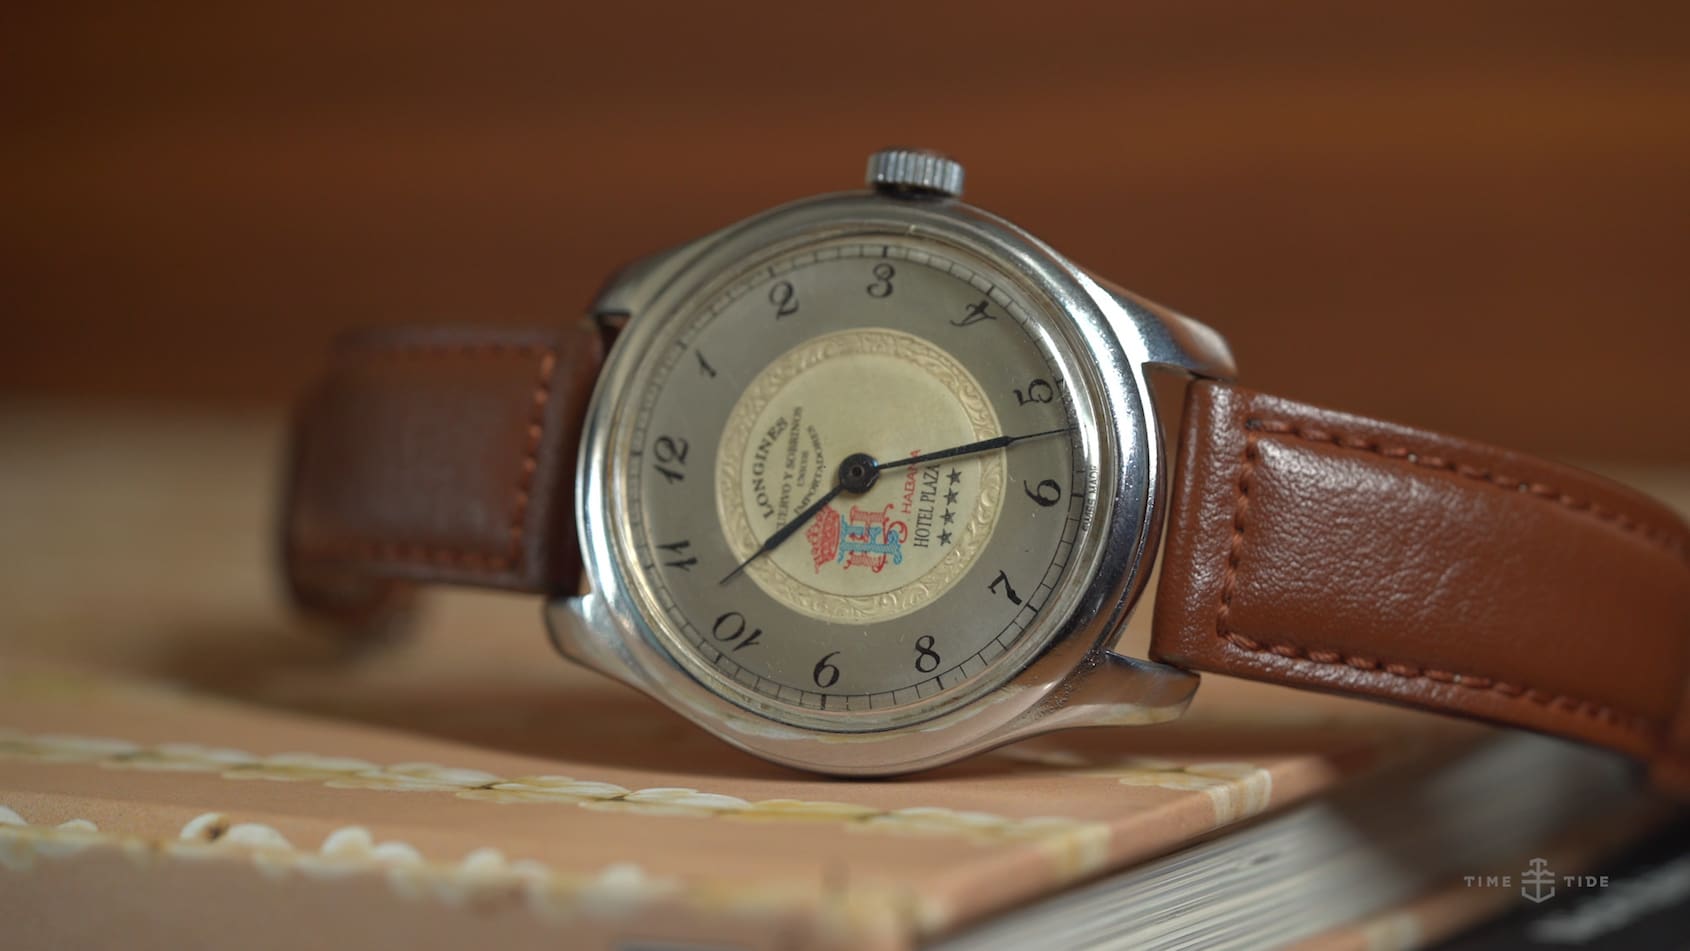 VIDEO: “I’m in a back street in Havana and a watchmaker says you should look at this…” – Adam and his Longines Cuervo Y Sobrinos